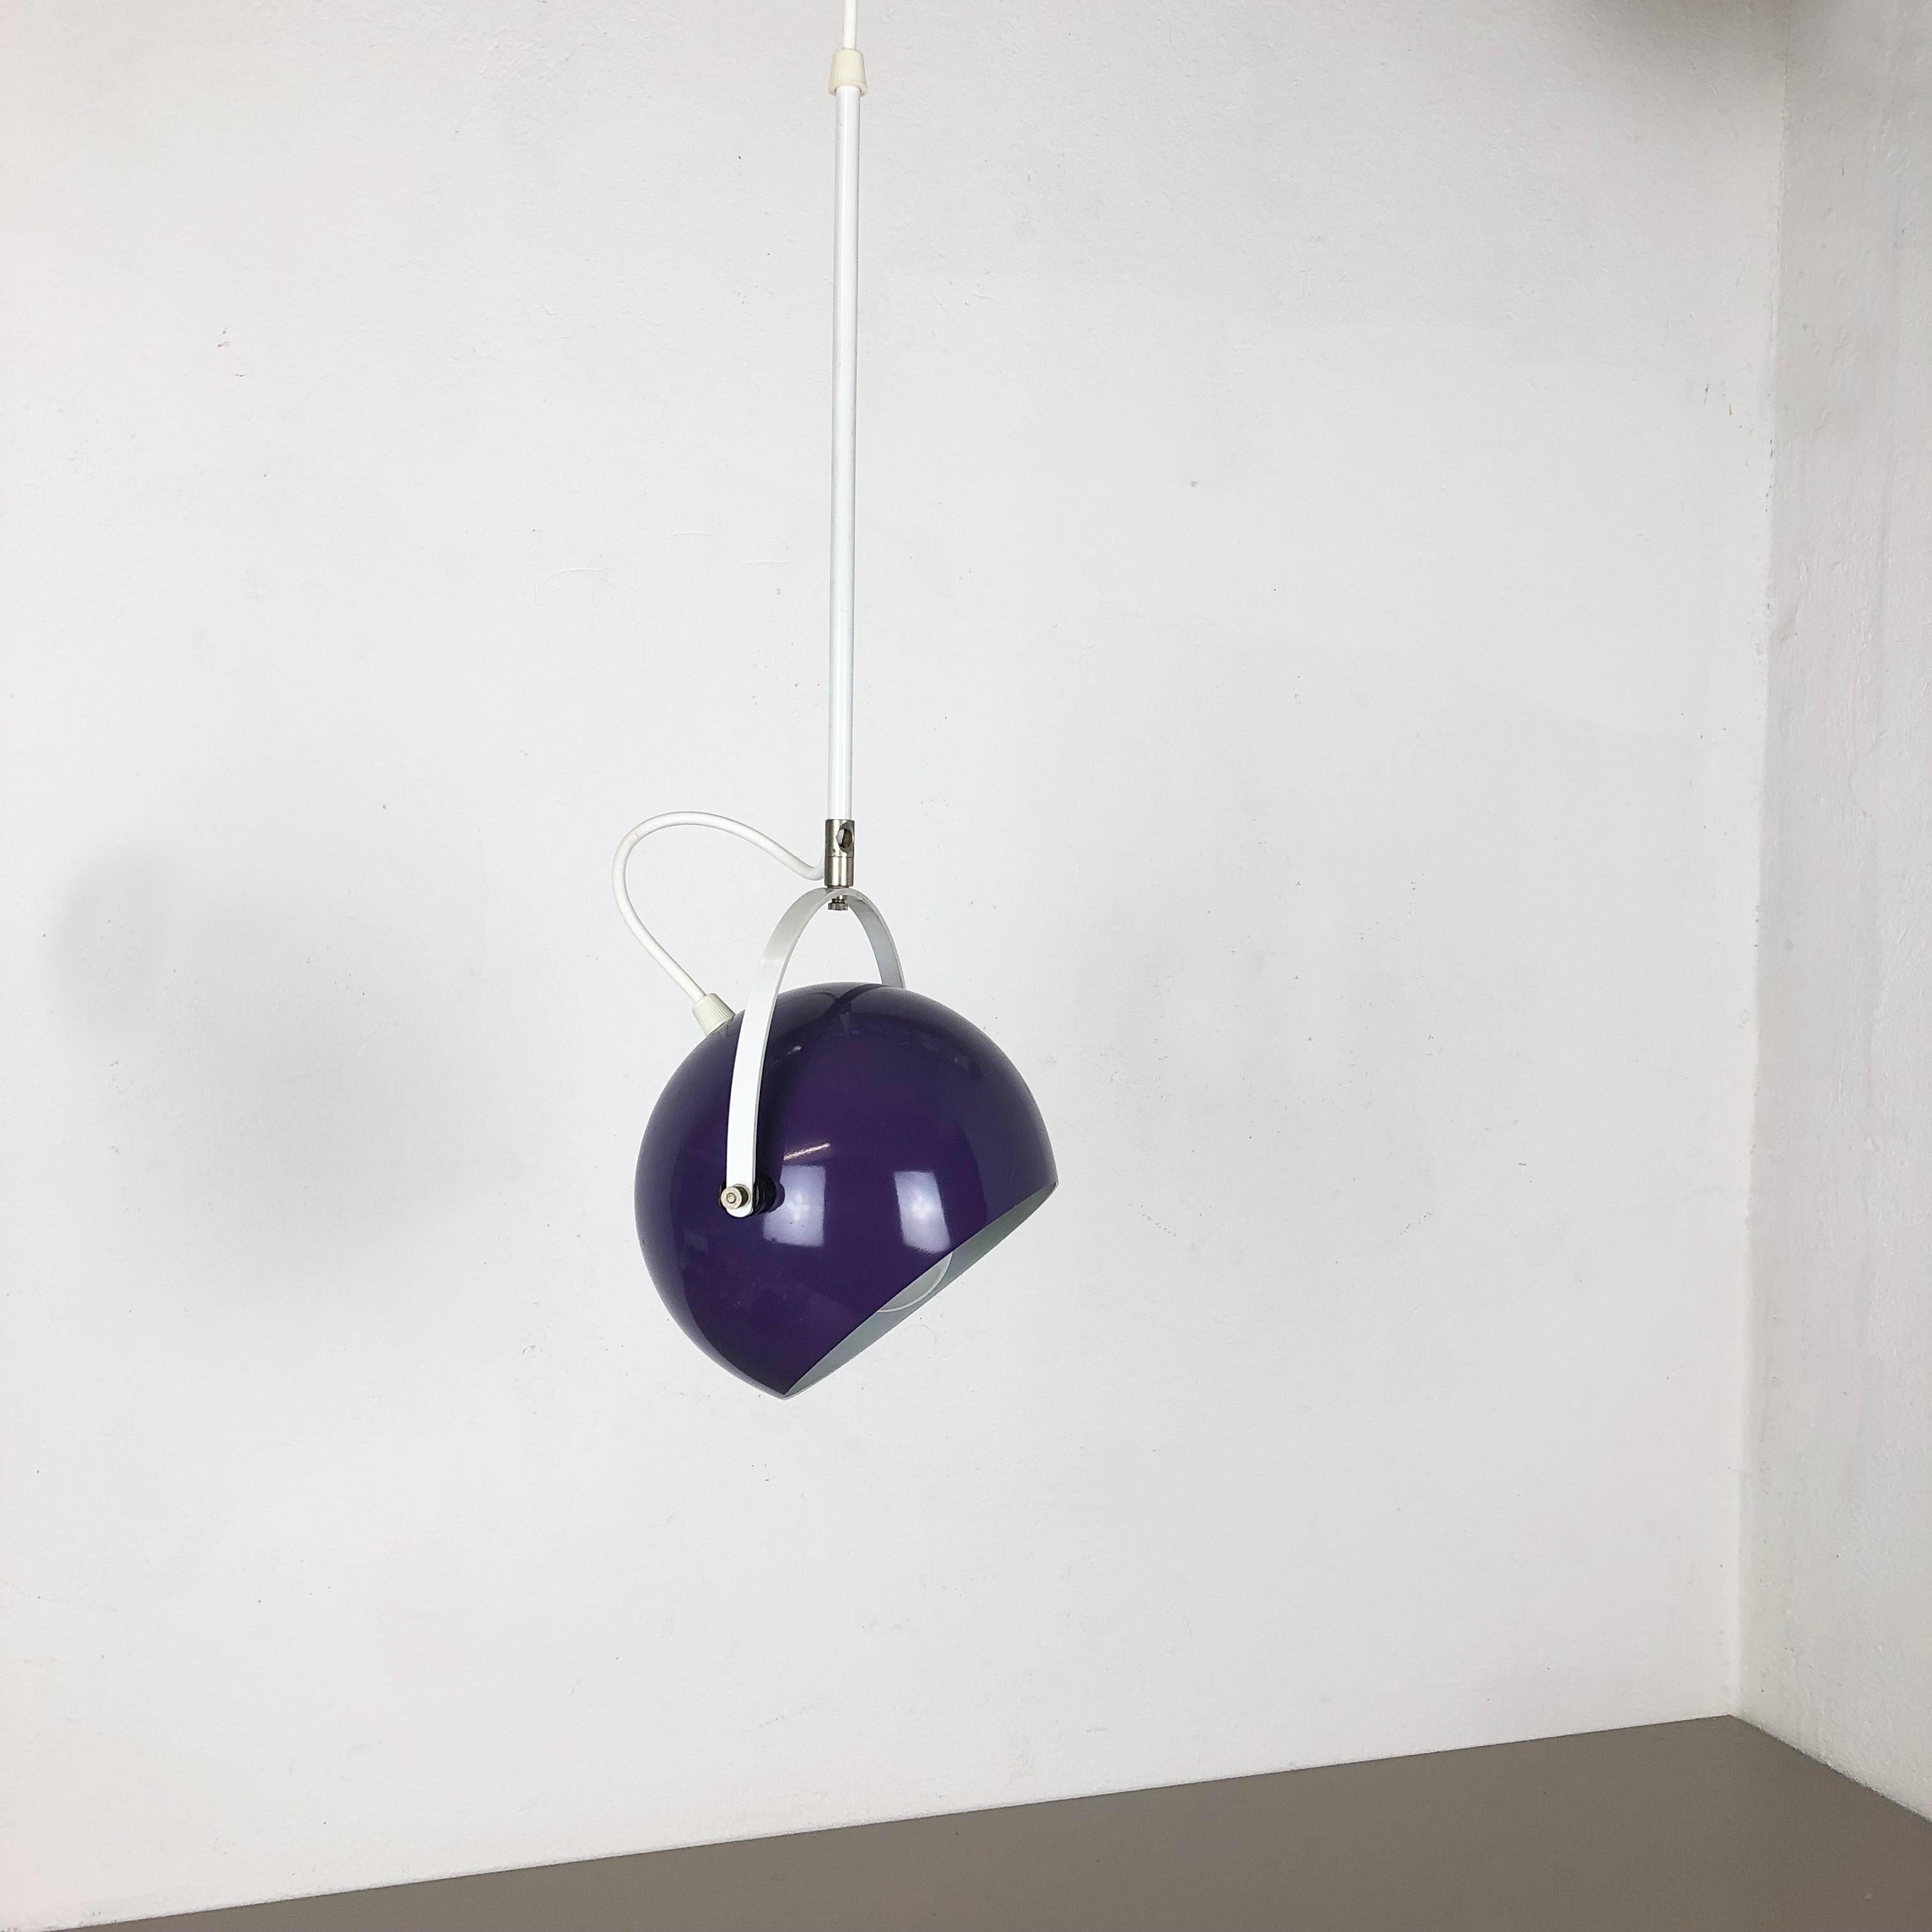 Purple spot hanging light.

Origin: Germany,

1970s.

This 1970s hanging spot light was made in Germany. The light has a purple colored spot which is fixed on a U-formed aluminum hanging mechanism. Due to this special hanging mechanism the